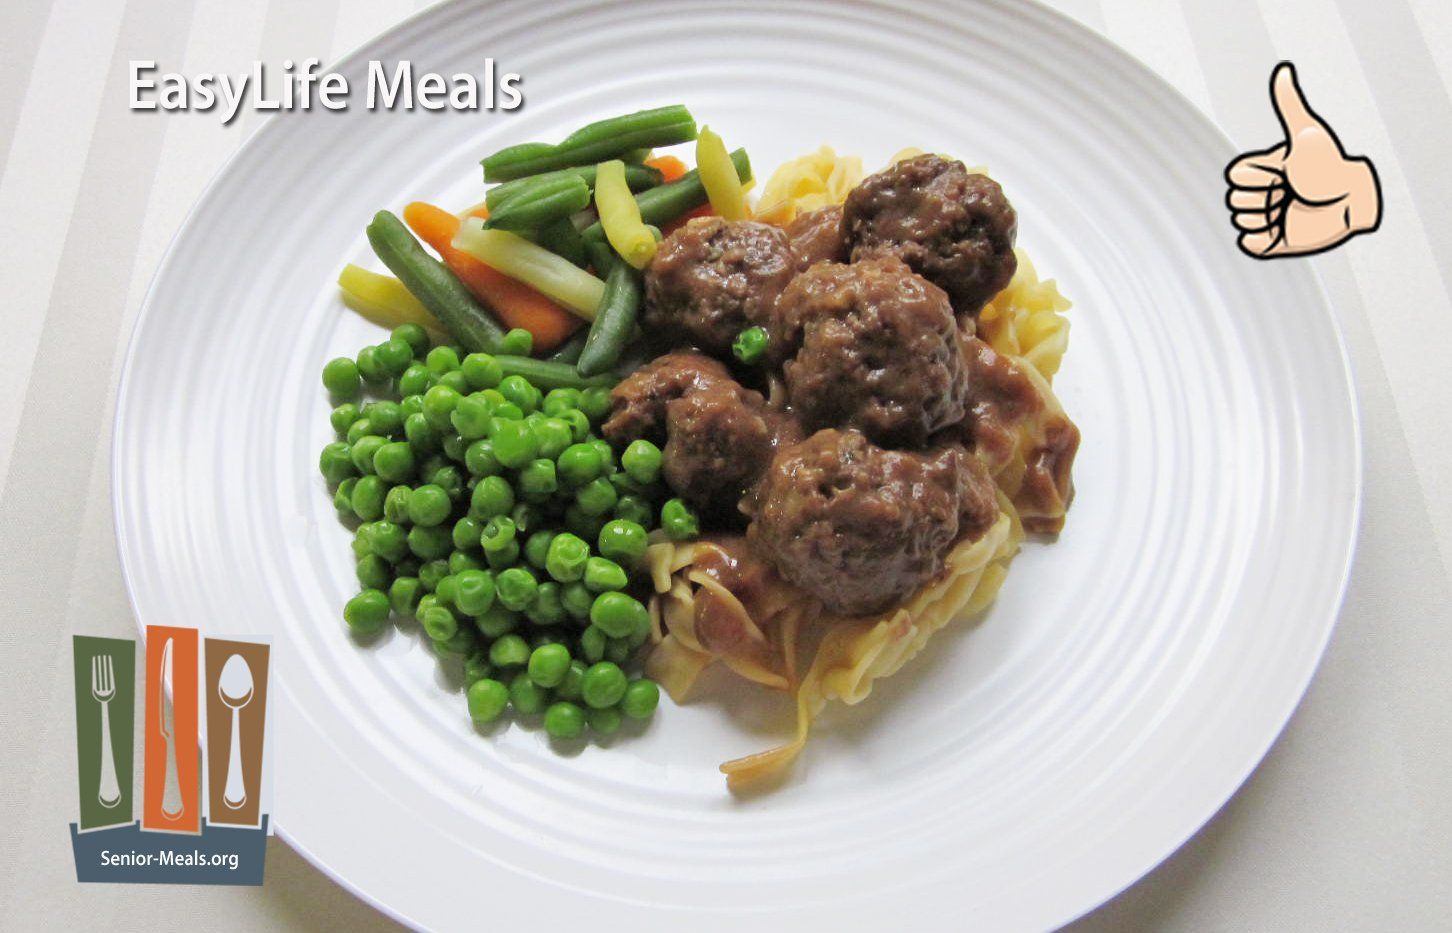 EasyLife Meals Prepared Meals for People with Diabetes